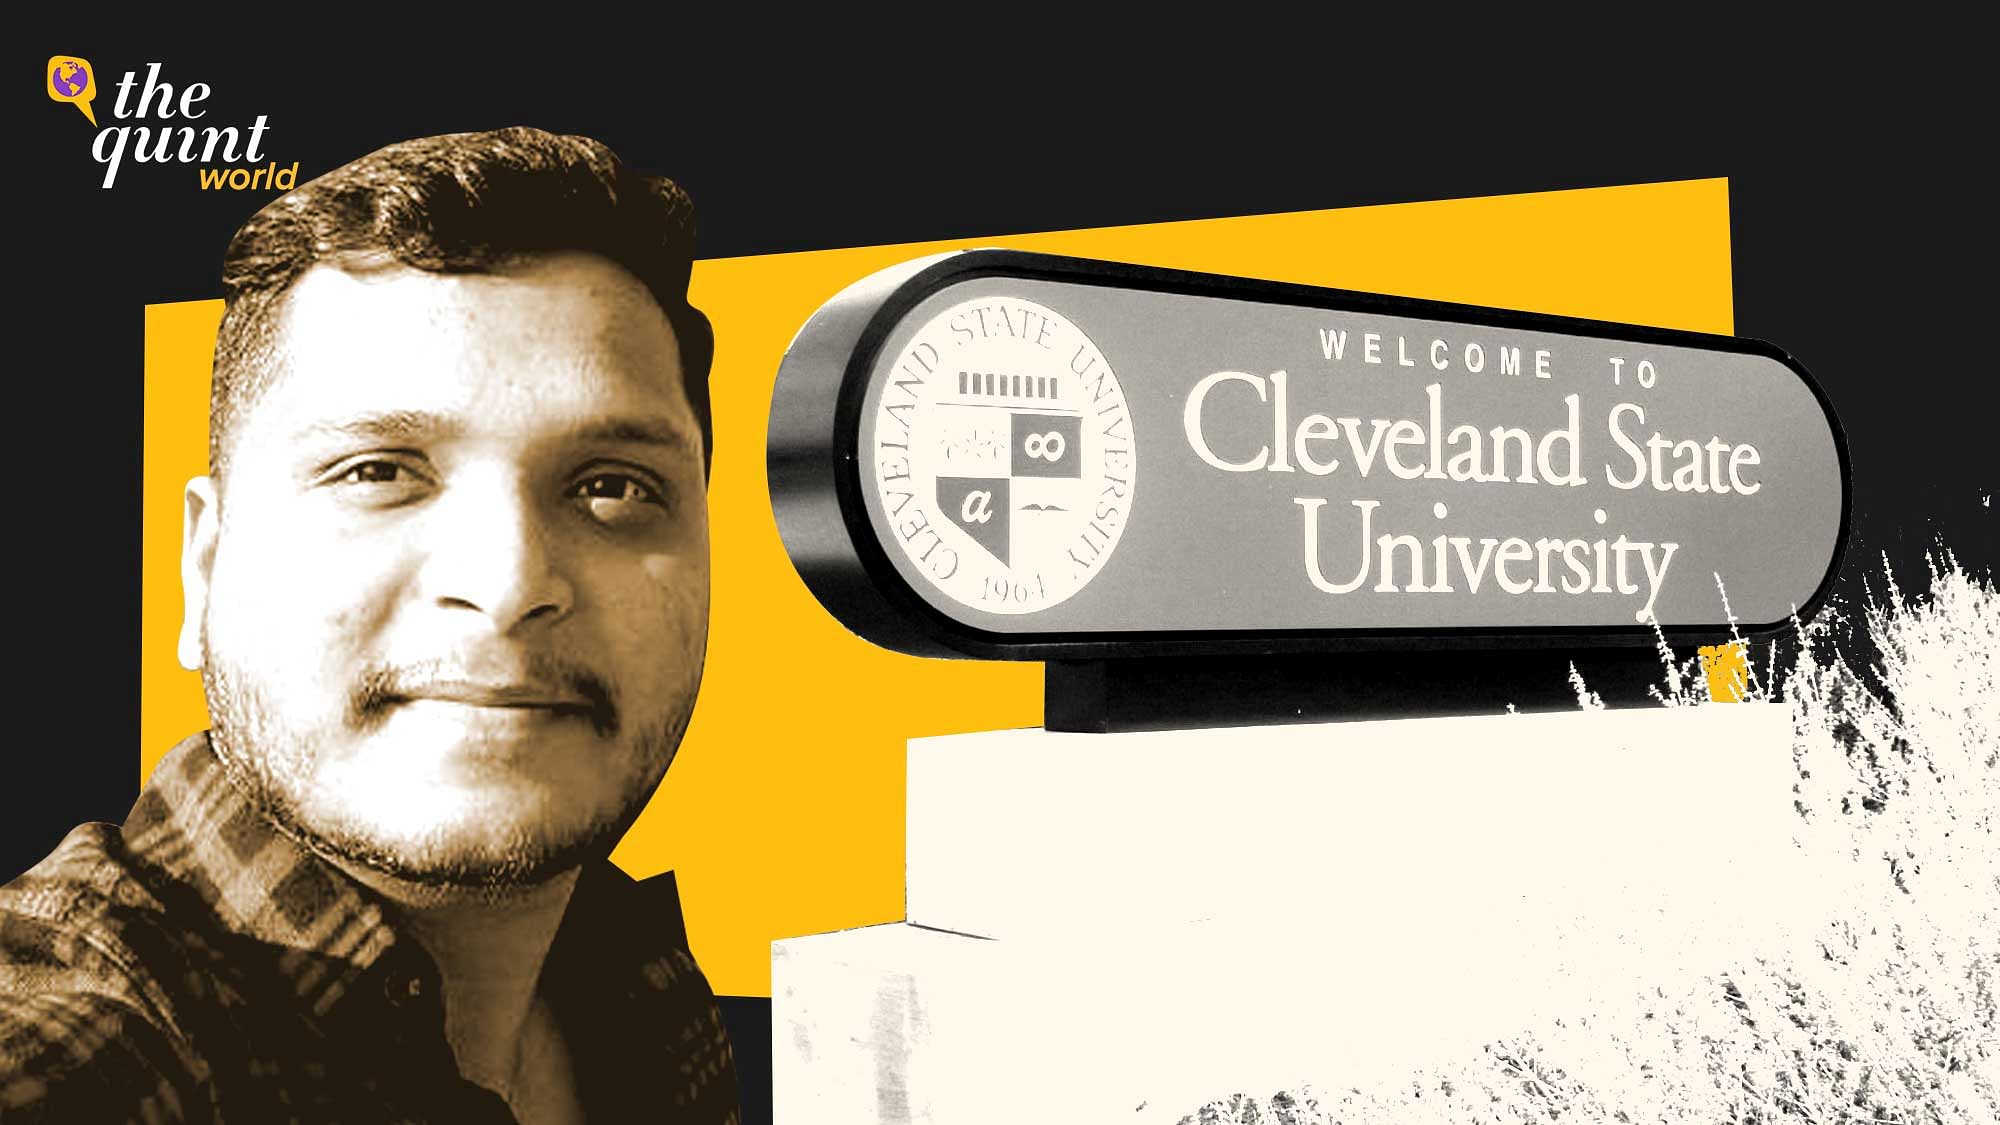 <div class="paragraphs"><p>Mohammed Abdul Arfath, a Telangana resident who was pursuing a Master's degree at Ohio's Cleveland State University, had been missing since 7 March. He was found dead in Cleveland's Lake Erie on 9 April.&nbsp;</p></div>